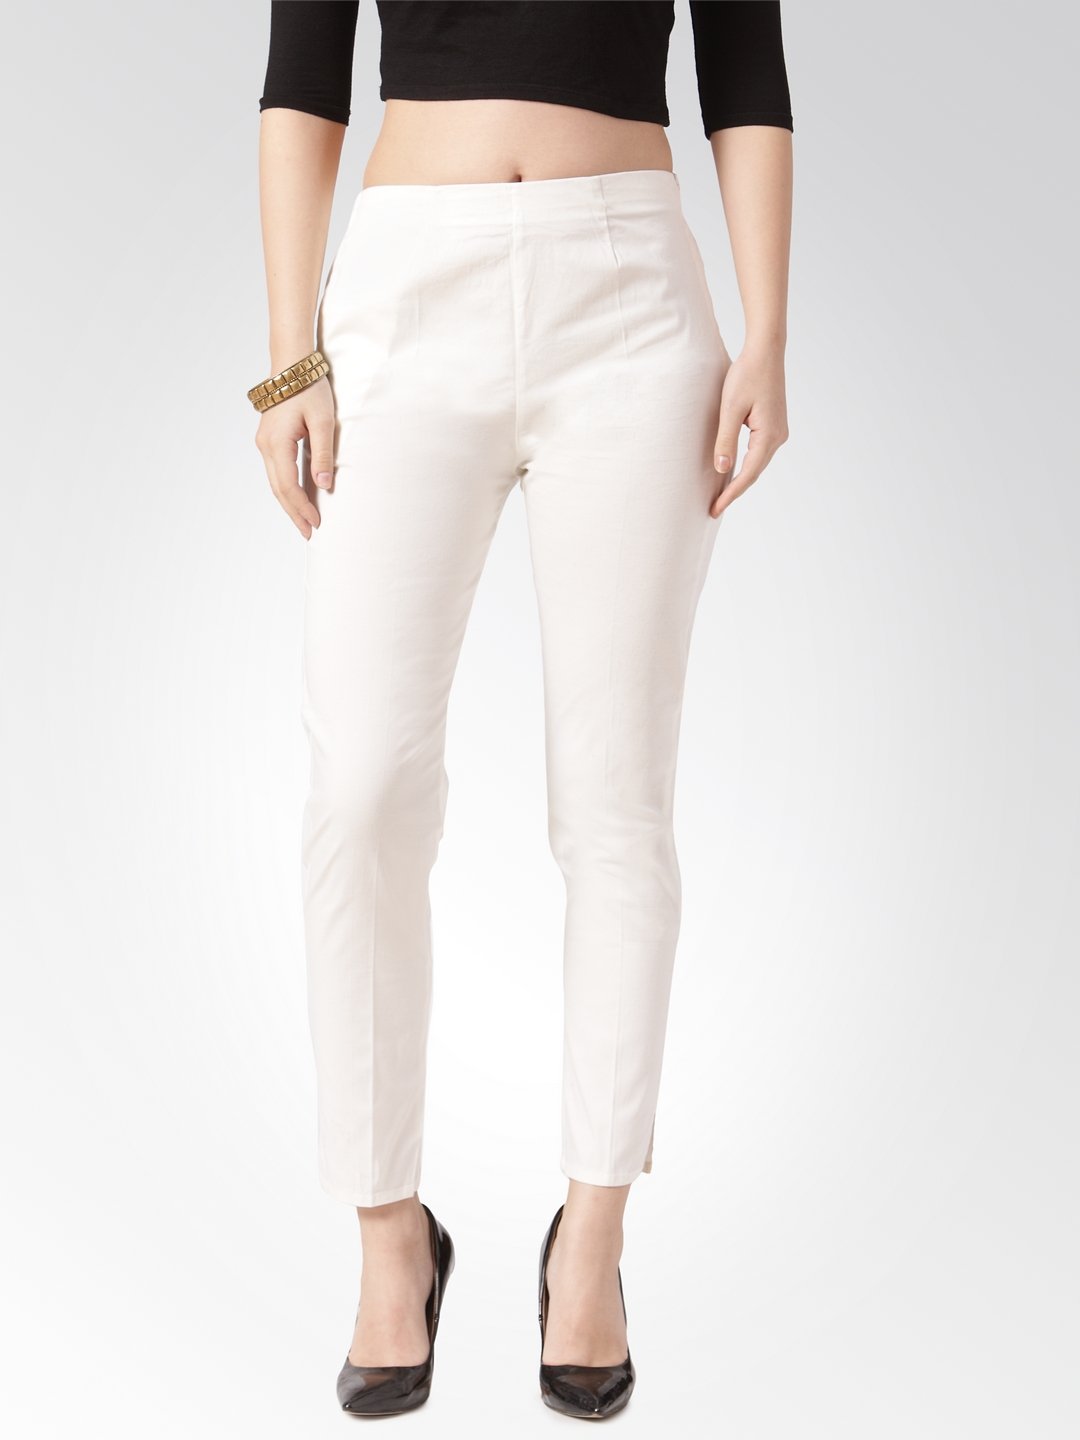 Women's Off White Smart Slim Fit Solid Regular Trousers - Jompers